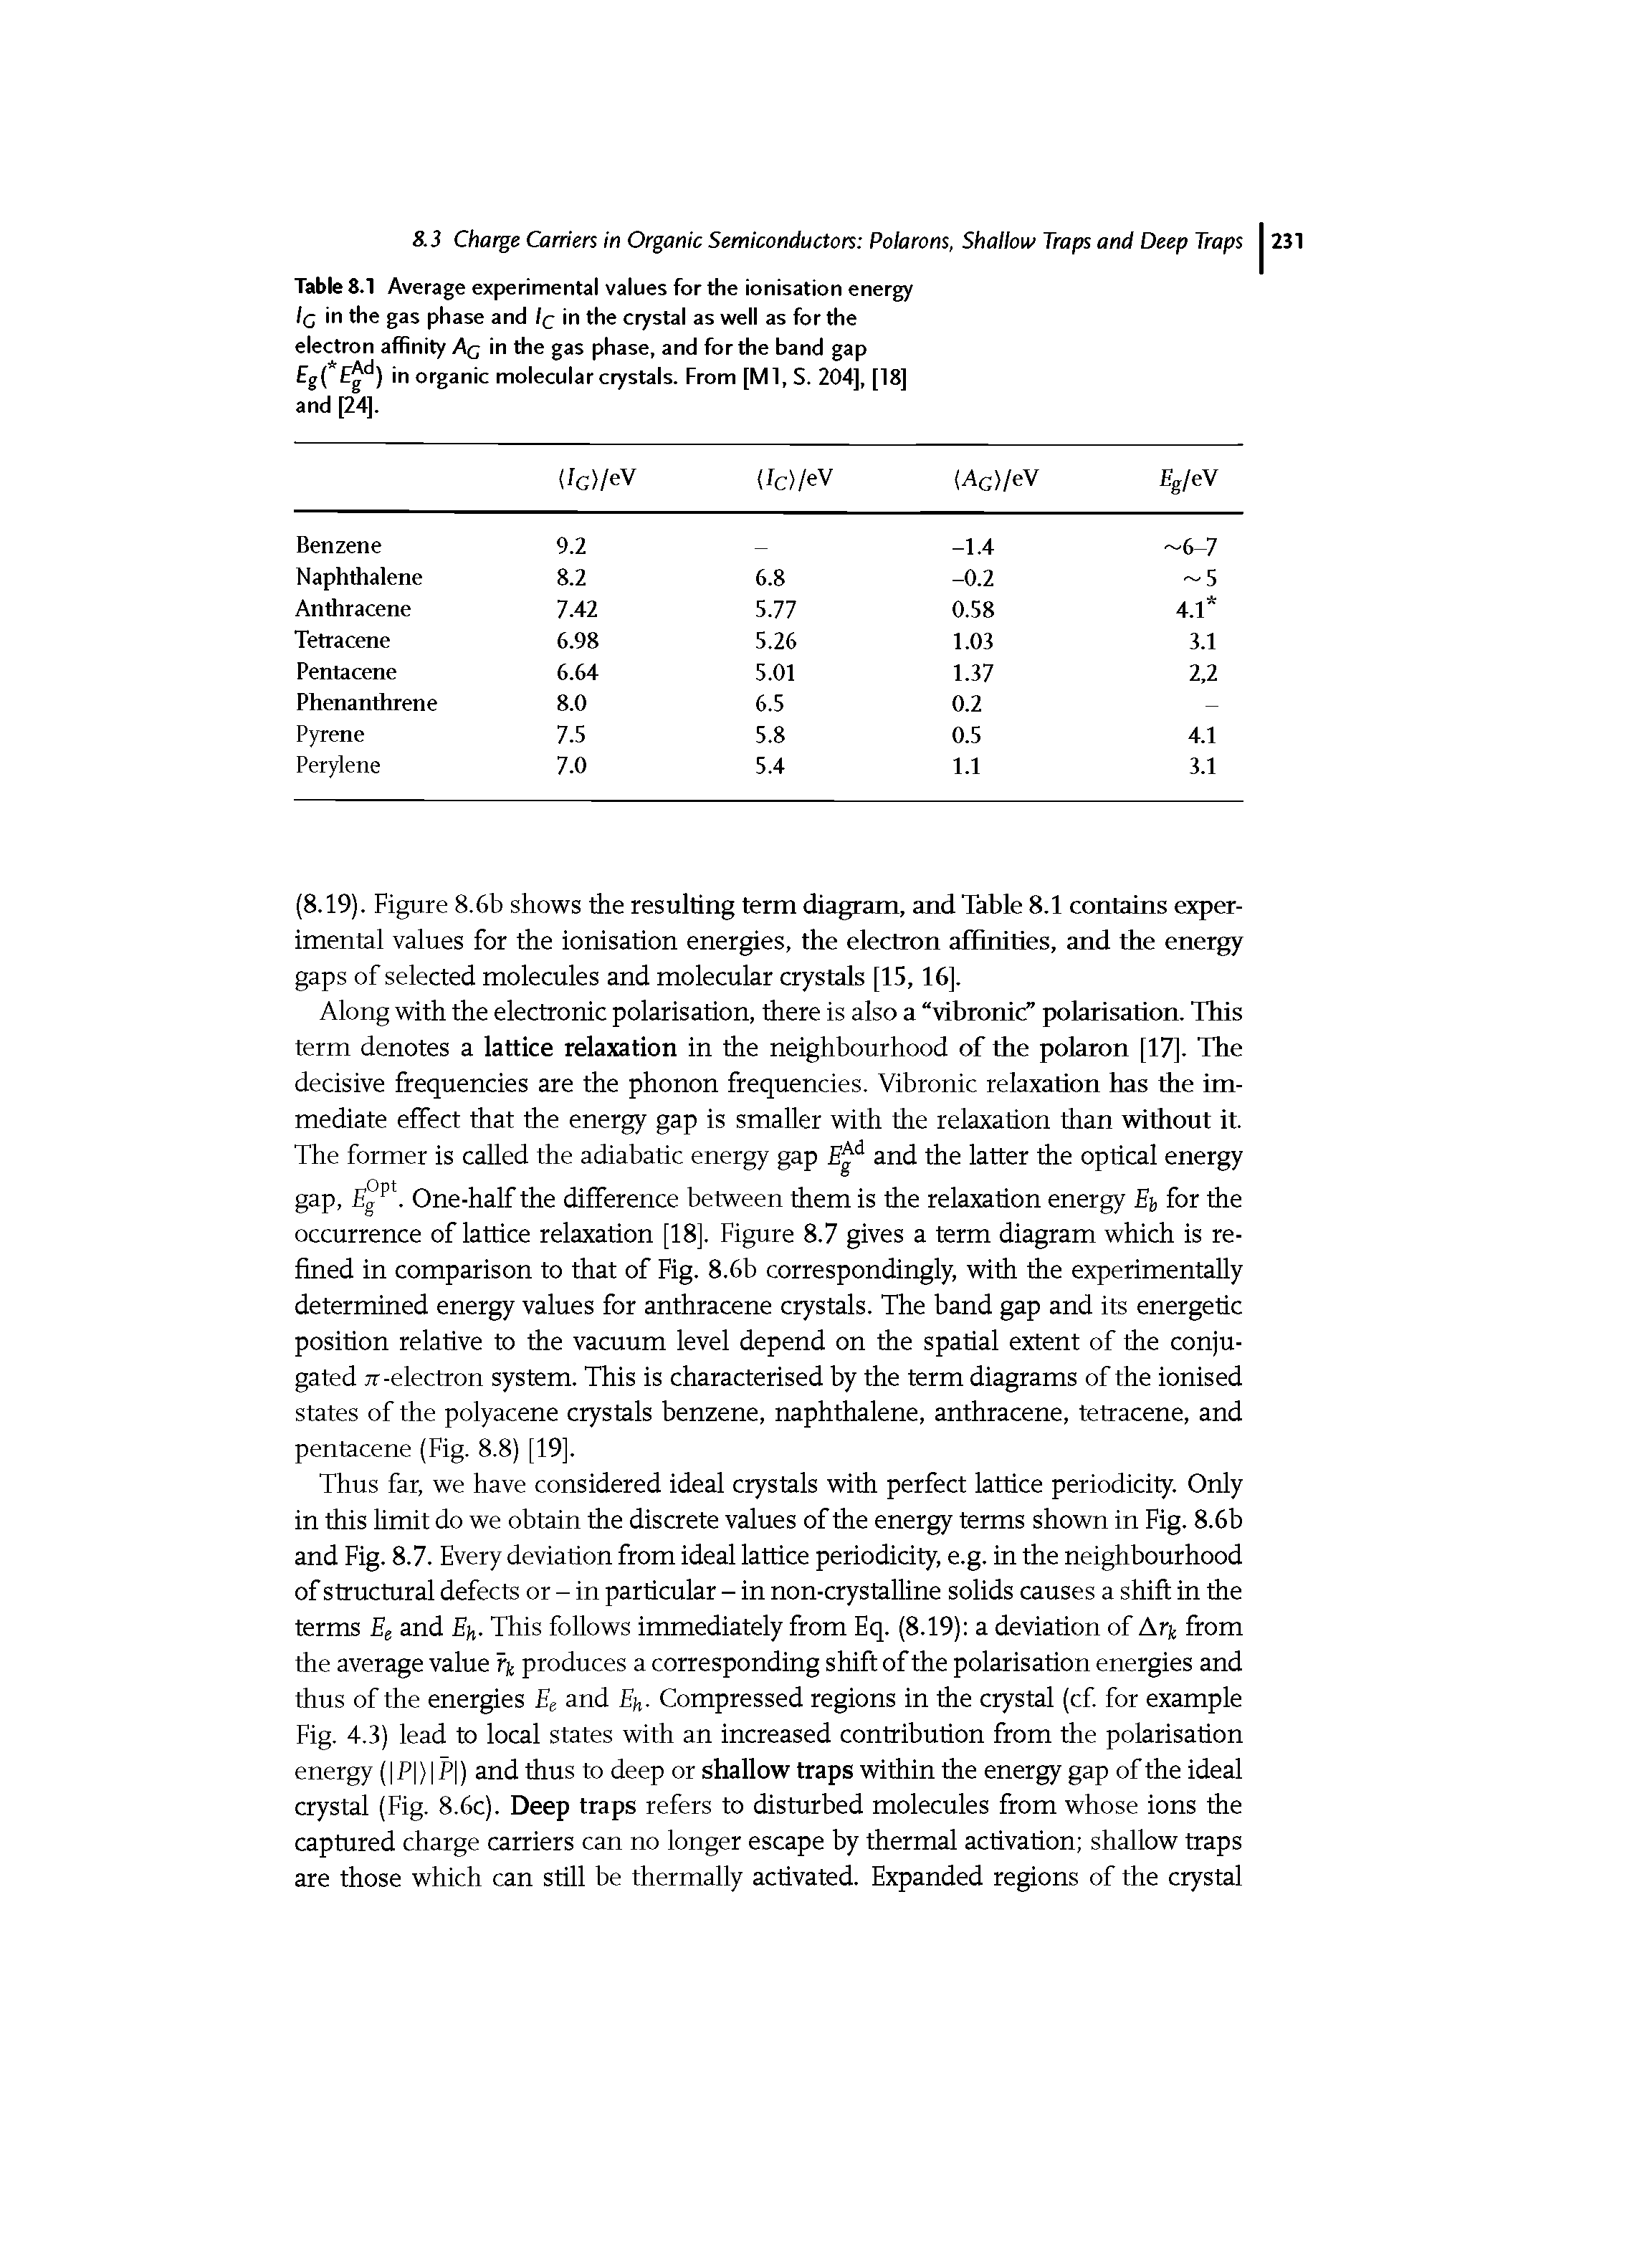 Table 8.1 Average experimental values for the ionisation energy /c in the gas phase and Ic in the crystal as well as for the electron affinity Ac in the gas phase, and for the band gap g( E ) in organic molecular crystals. From [Ml, S. 204], [18] and [24].